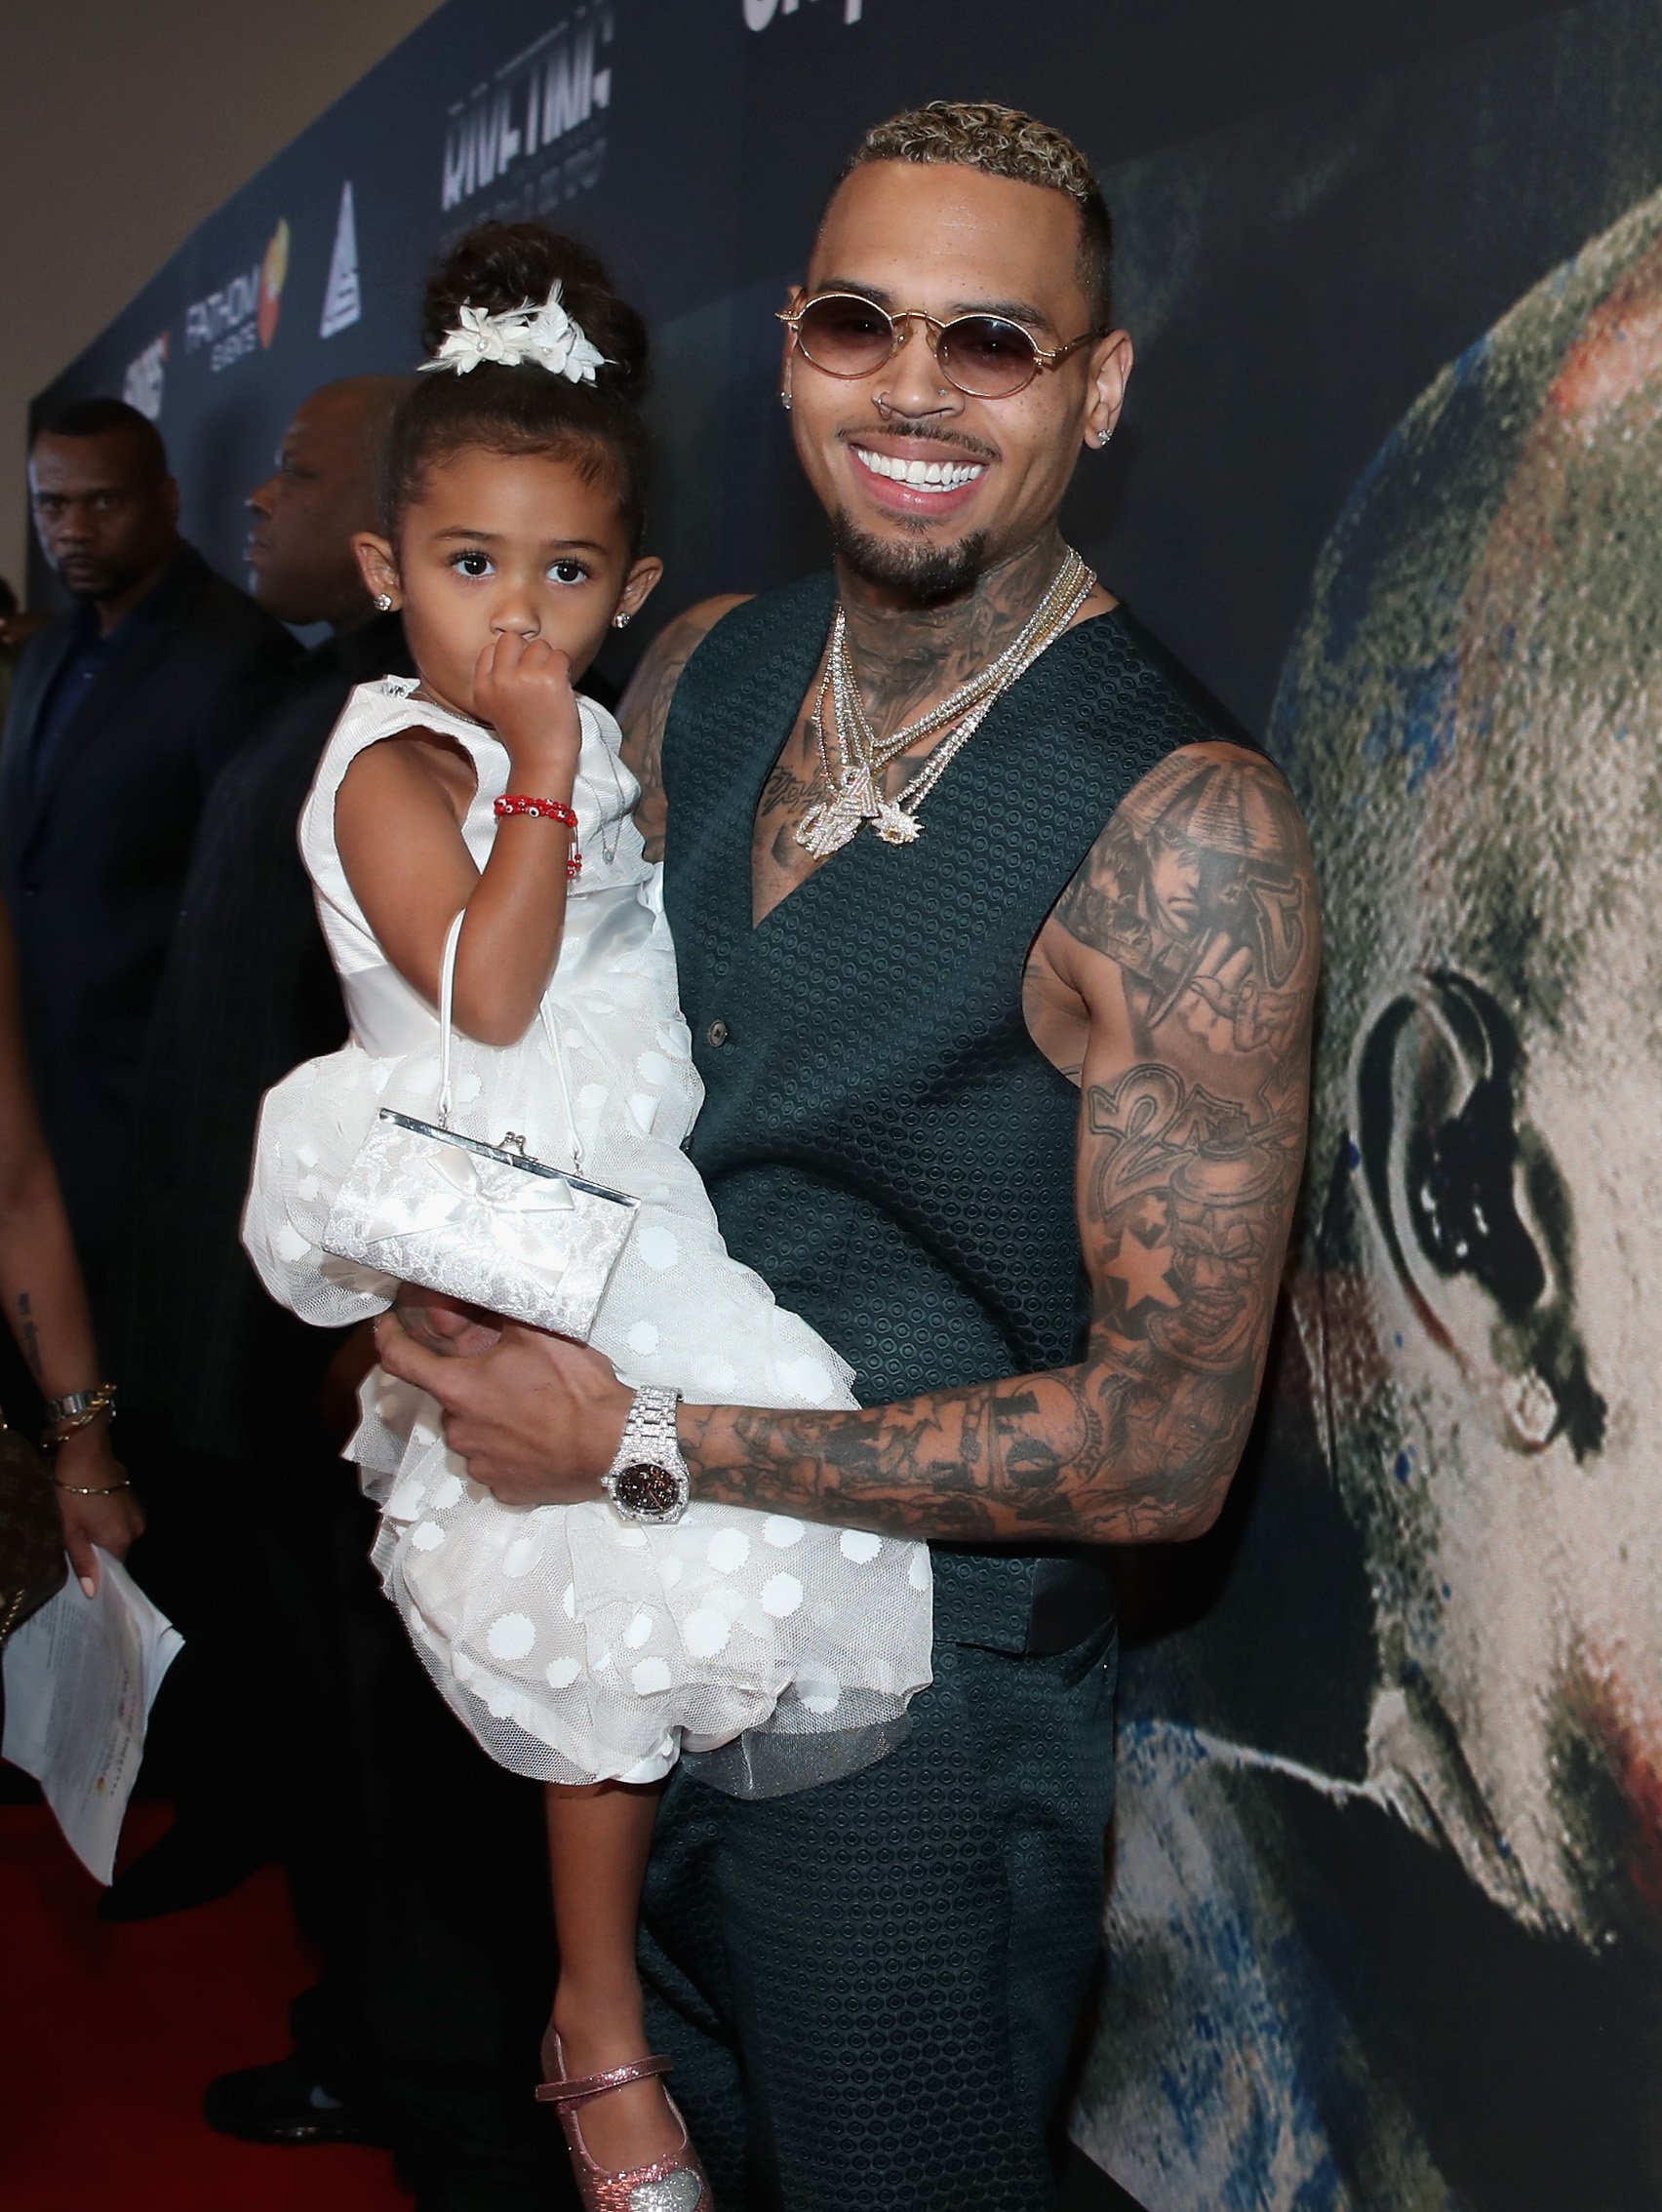 Chris Brown and his daughter Royalty at the Premiere Of "Chris Brown: Welcome To My Life" on June 6, 2017 in California | Photo: Getty Images